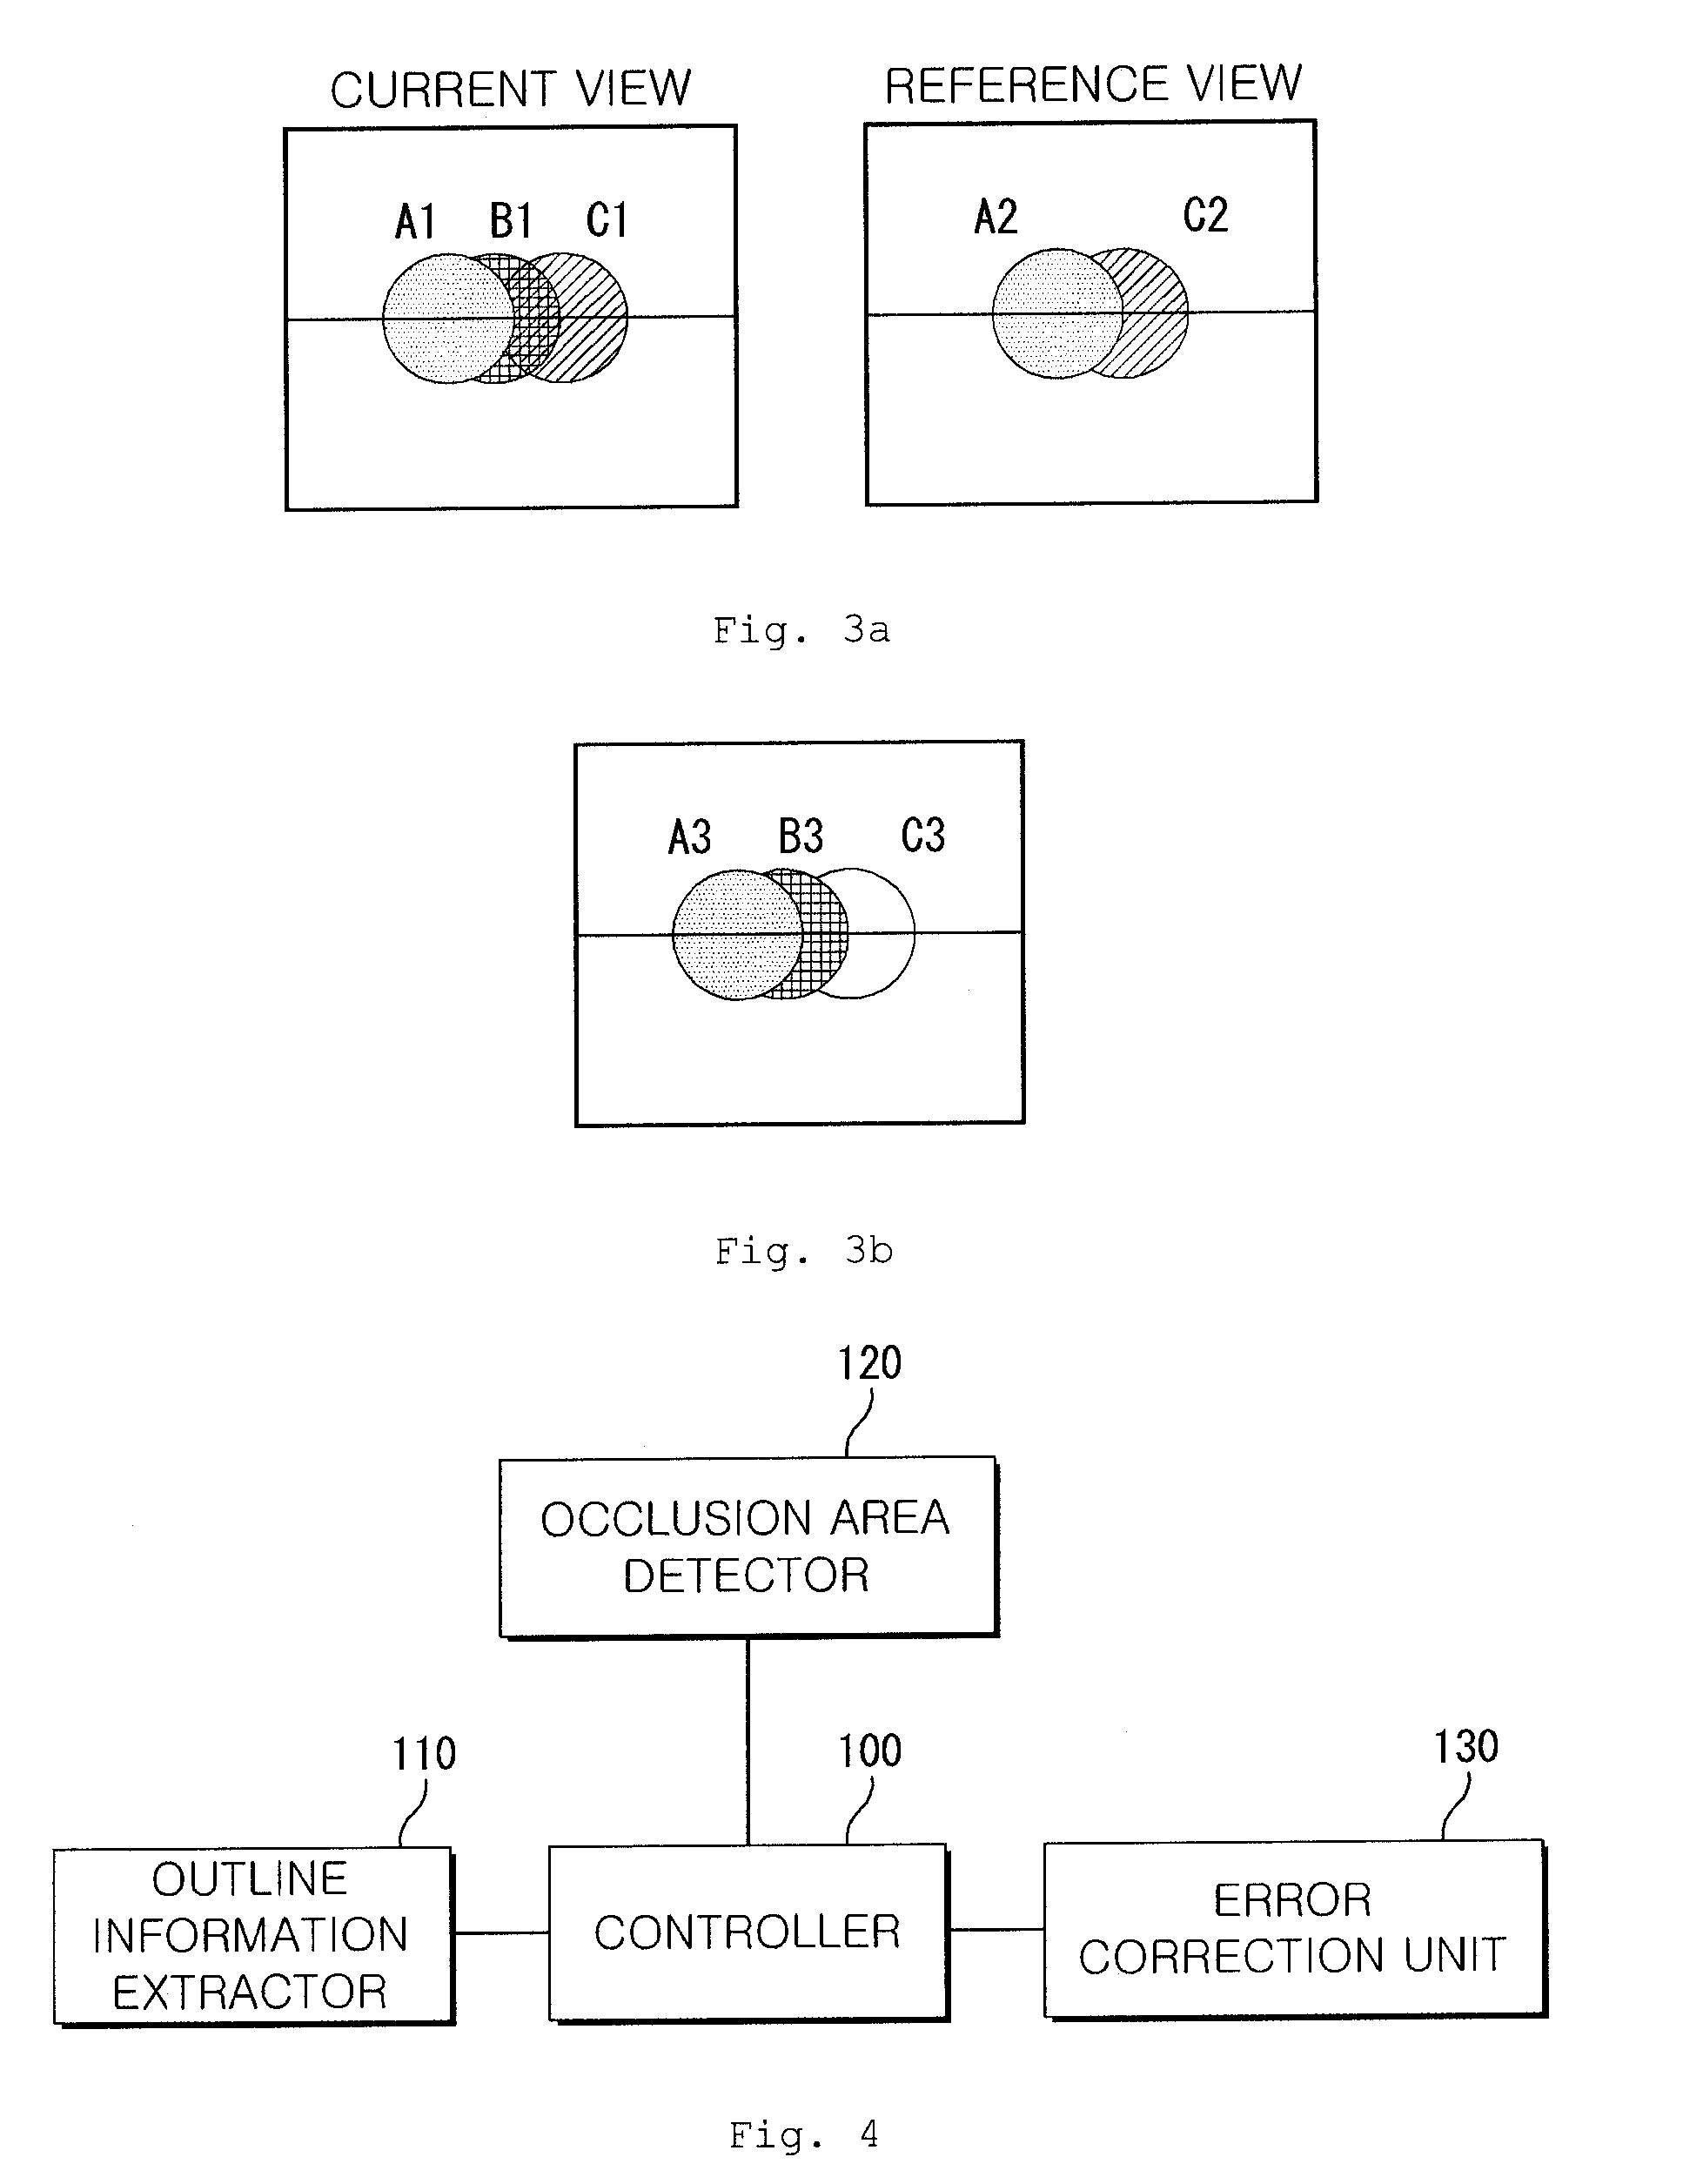 Method and System For Calculating Depth Information of Object in Image